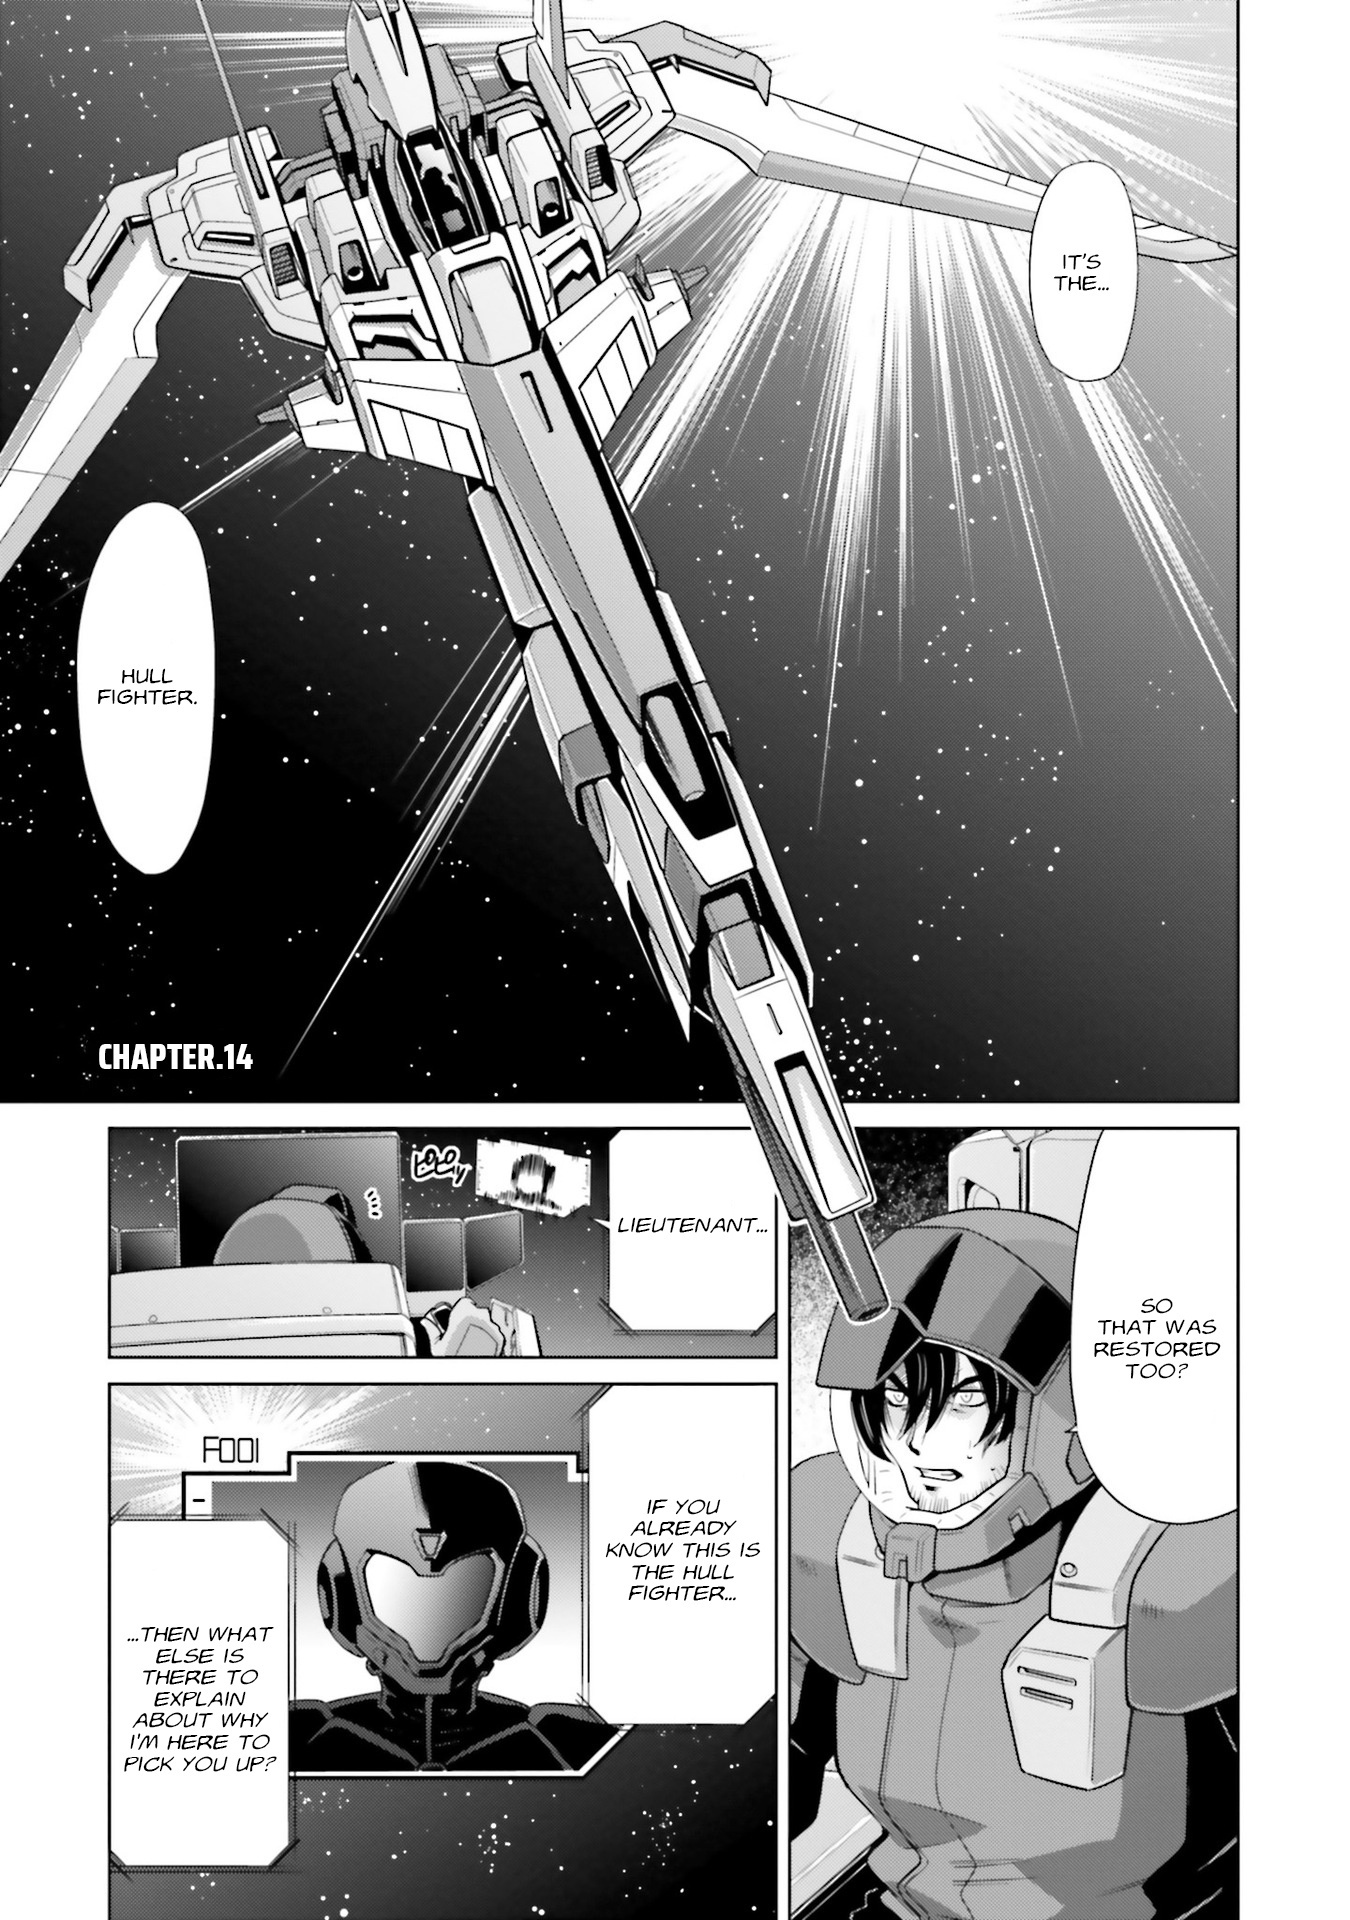 Mobile Suit Gundam F90 Ff Vol.4 Chapter 14: Dill Ryder - Picture 2